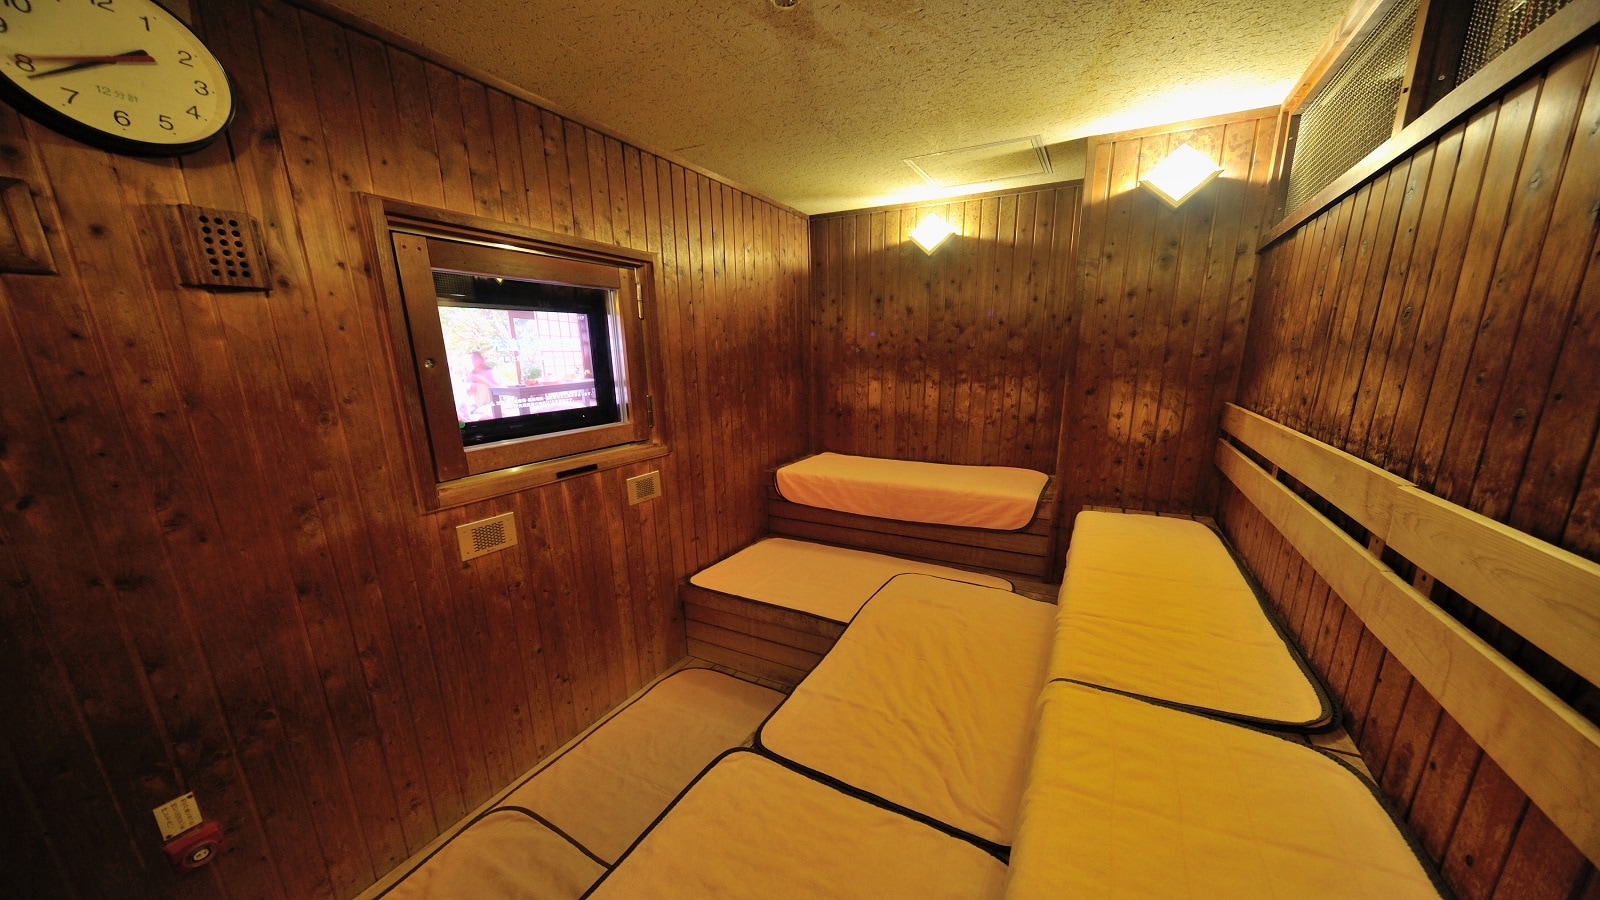 High temperature sauna for men and women (with TV) (96 ℃) For safety reasons, it is stopped from 1:00 to 5:00 at midnight.